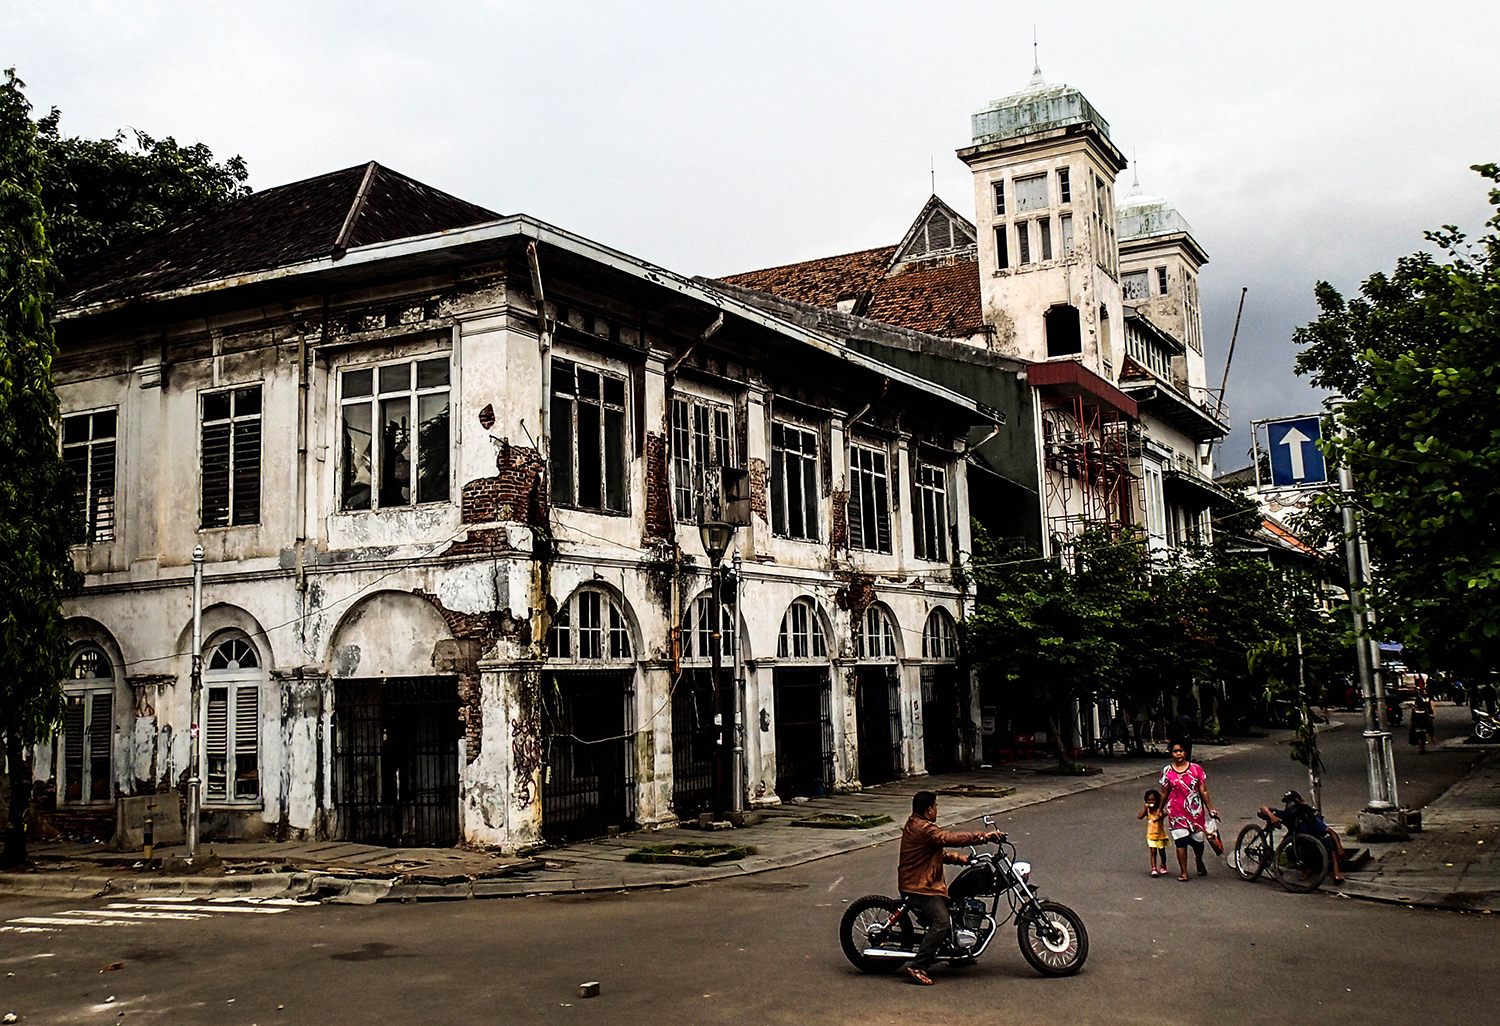 <p>A street scene in the former colonial core of Jakarta, known as Batavia under the Dutch.</p>